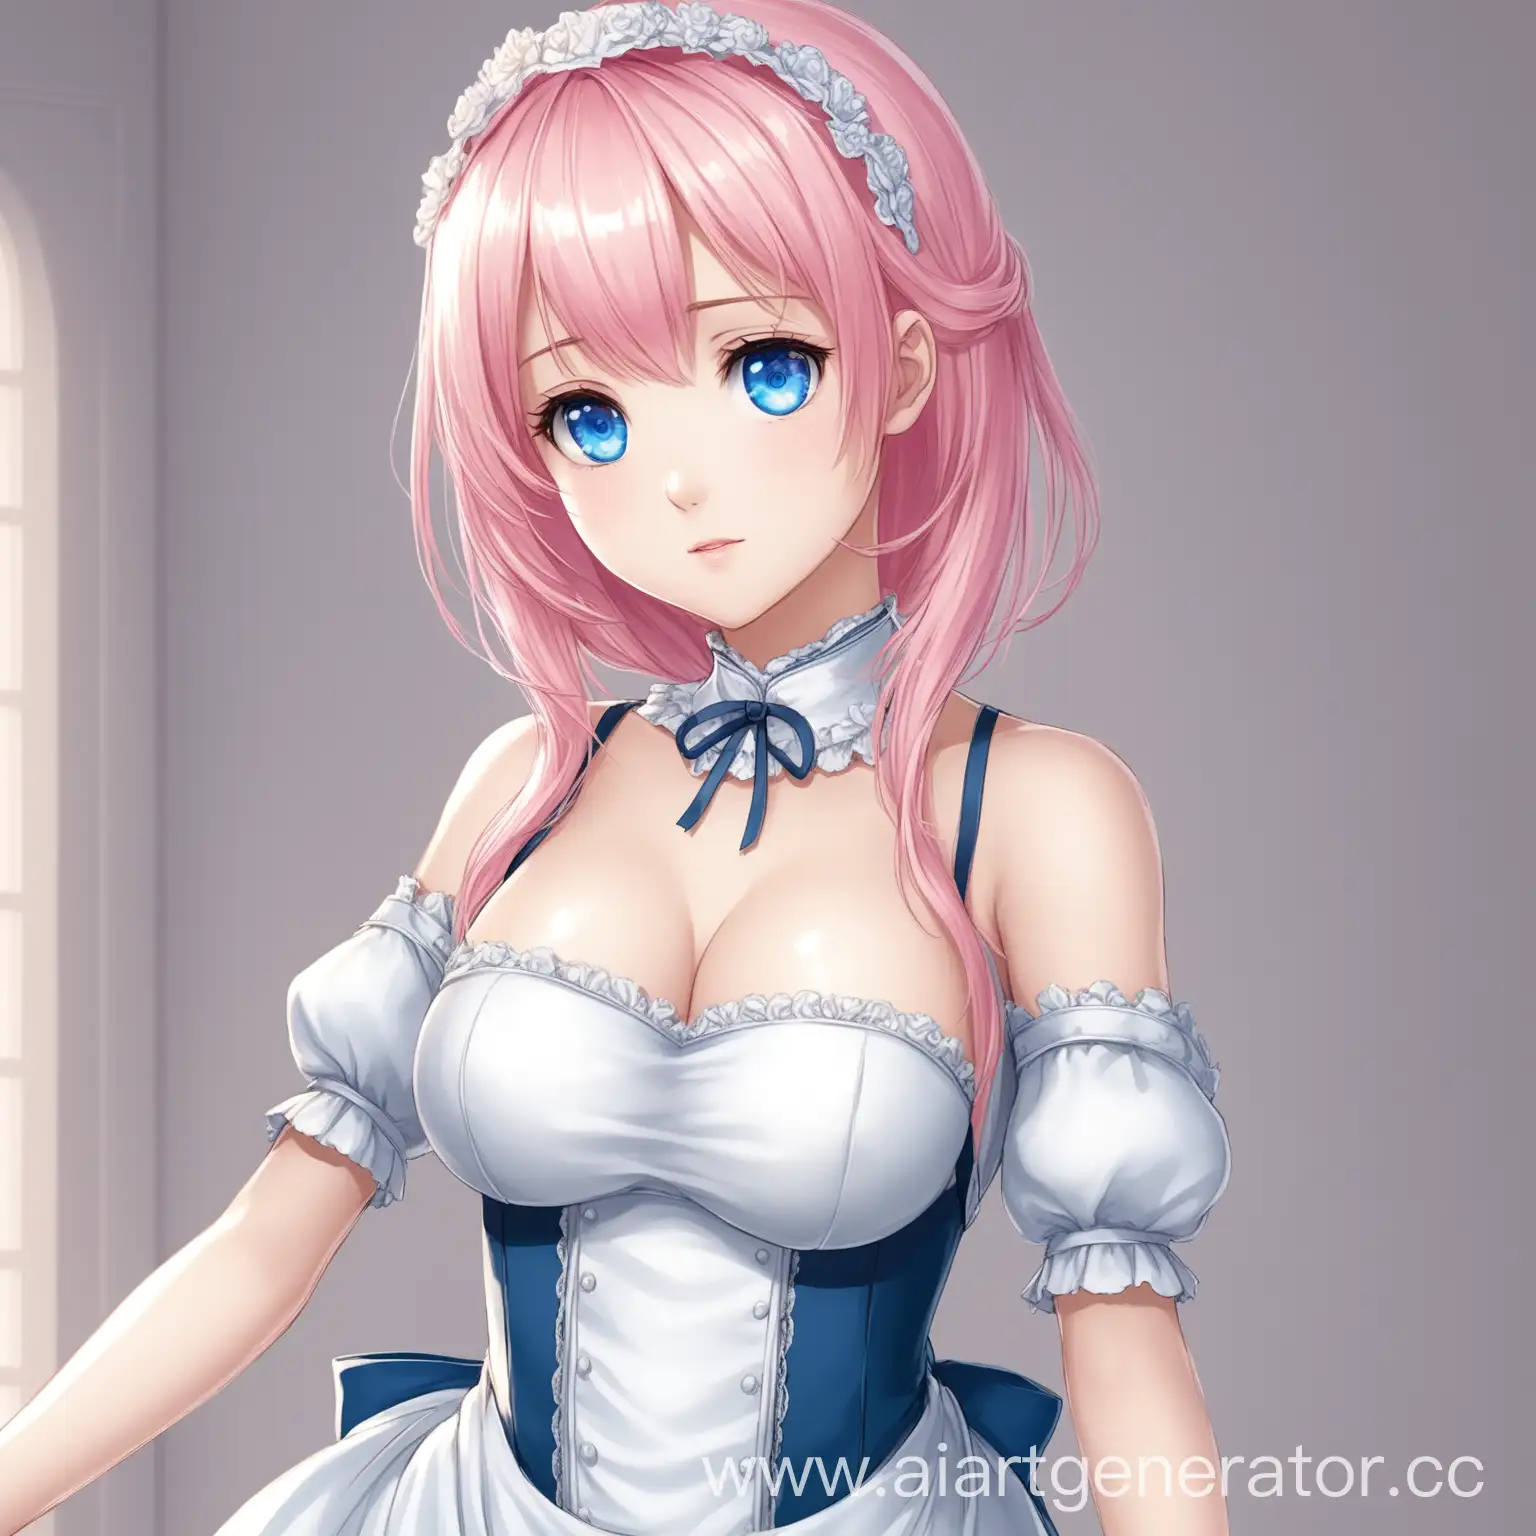 Maiden-Servant-with-Pink-Hair-and-Blue-Eyes